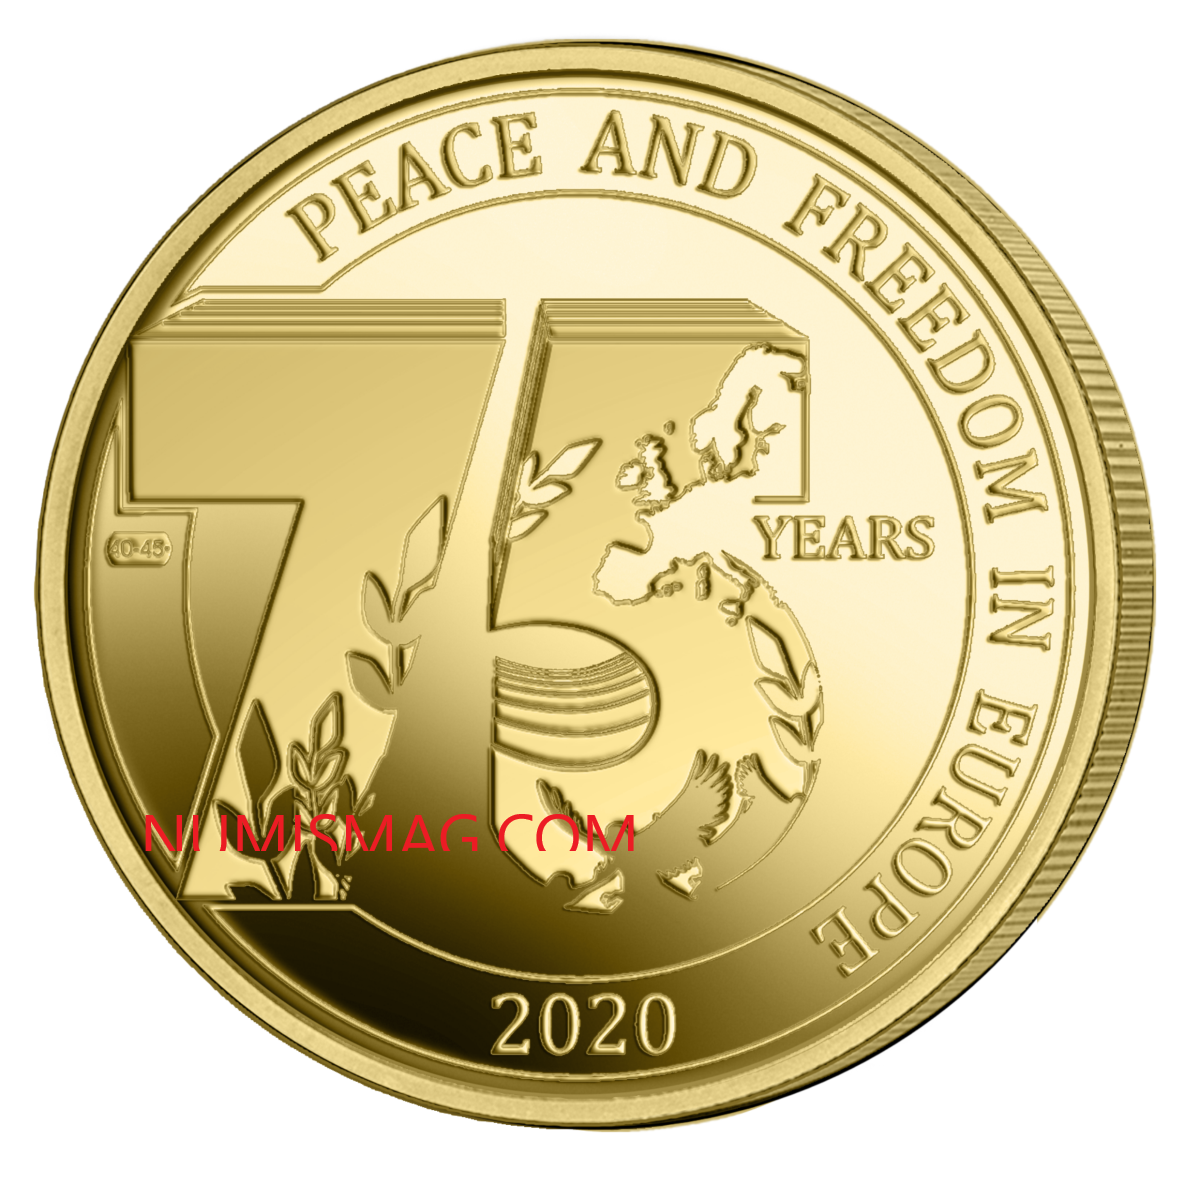 2020 belgian €2,5 coin celebrating 75 years of peace and freedom in Europe